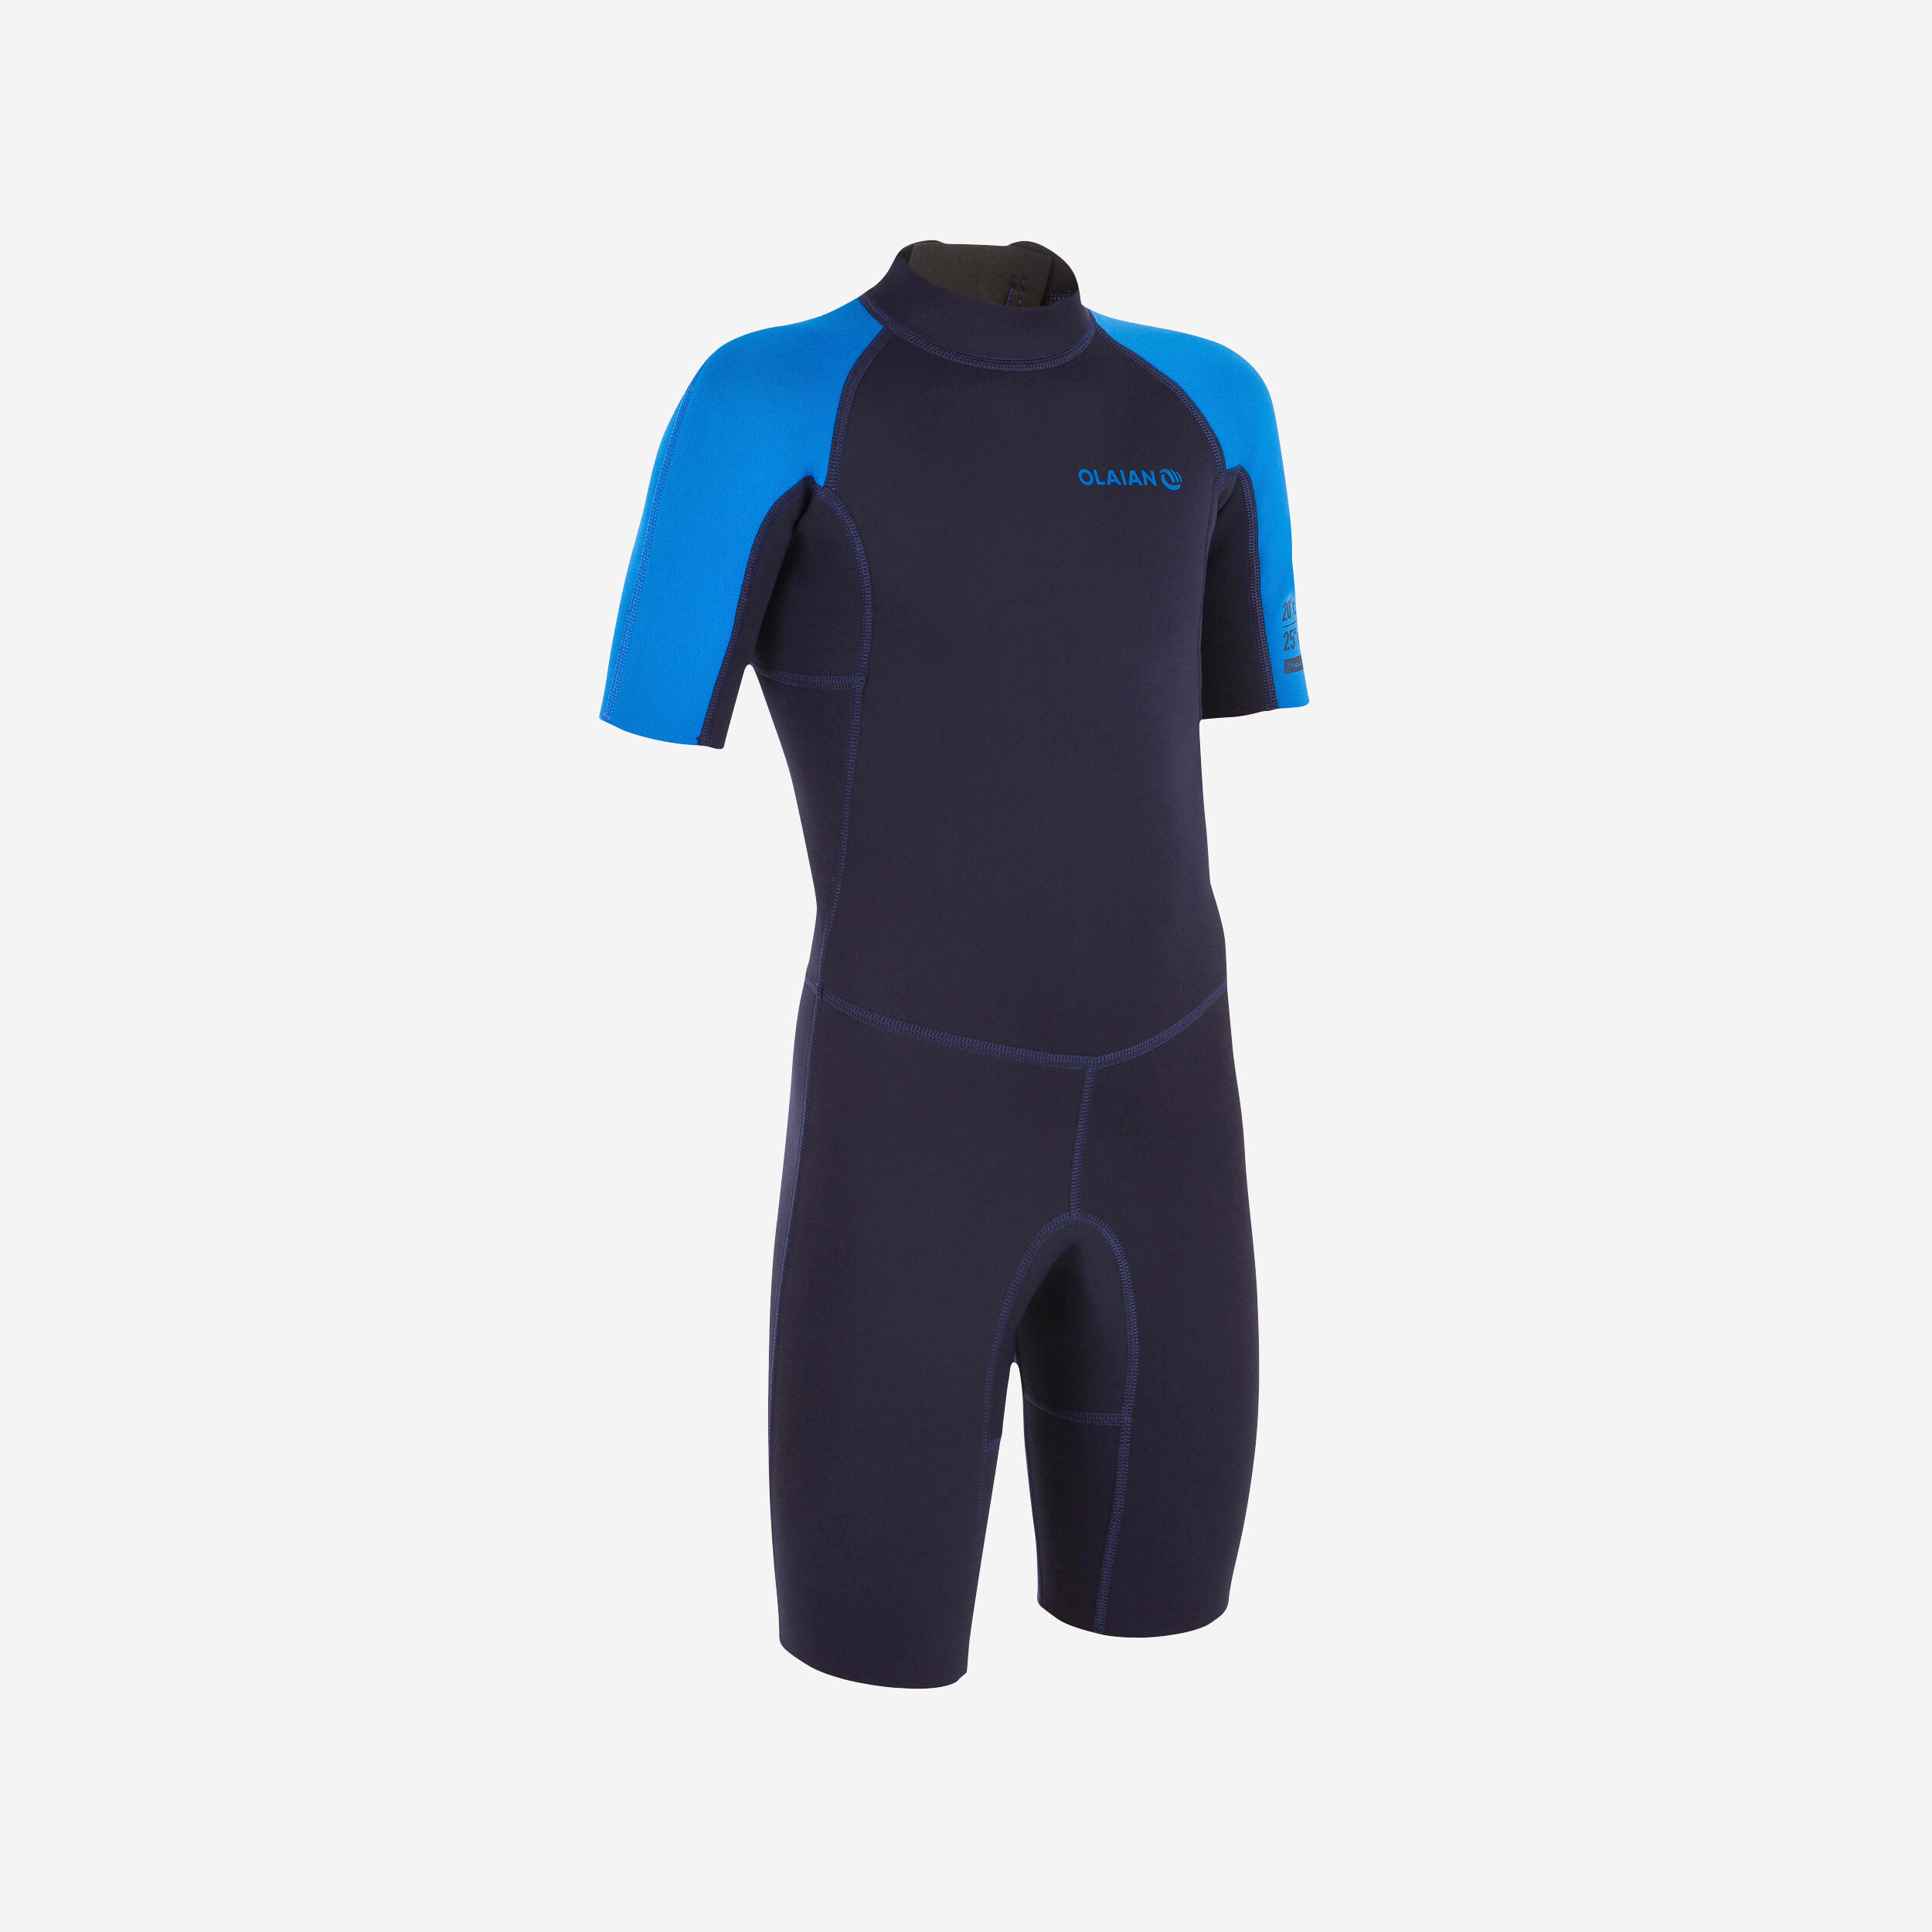 Kids' Shorty Wetsuits